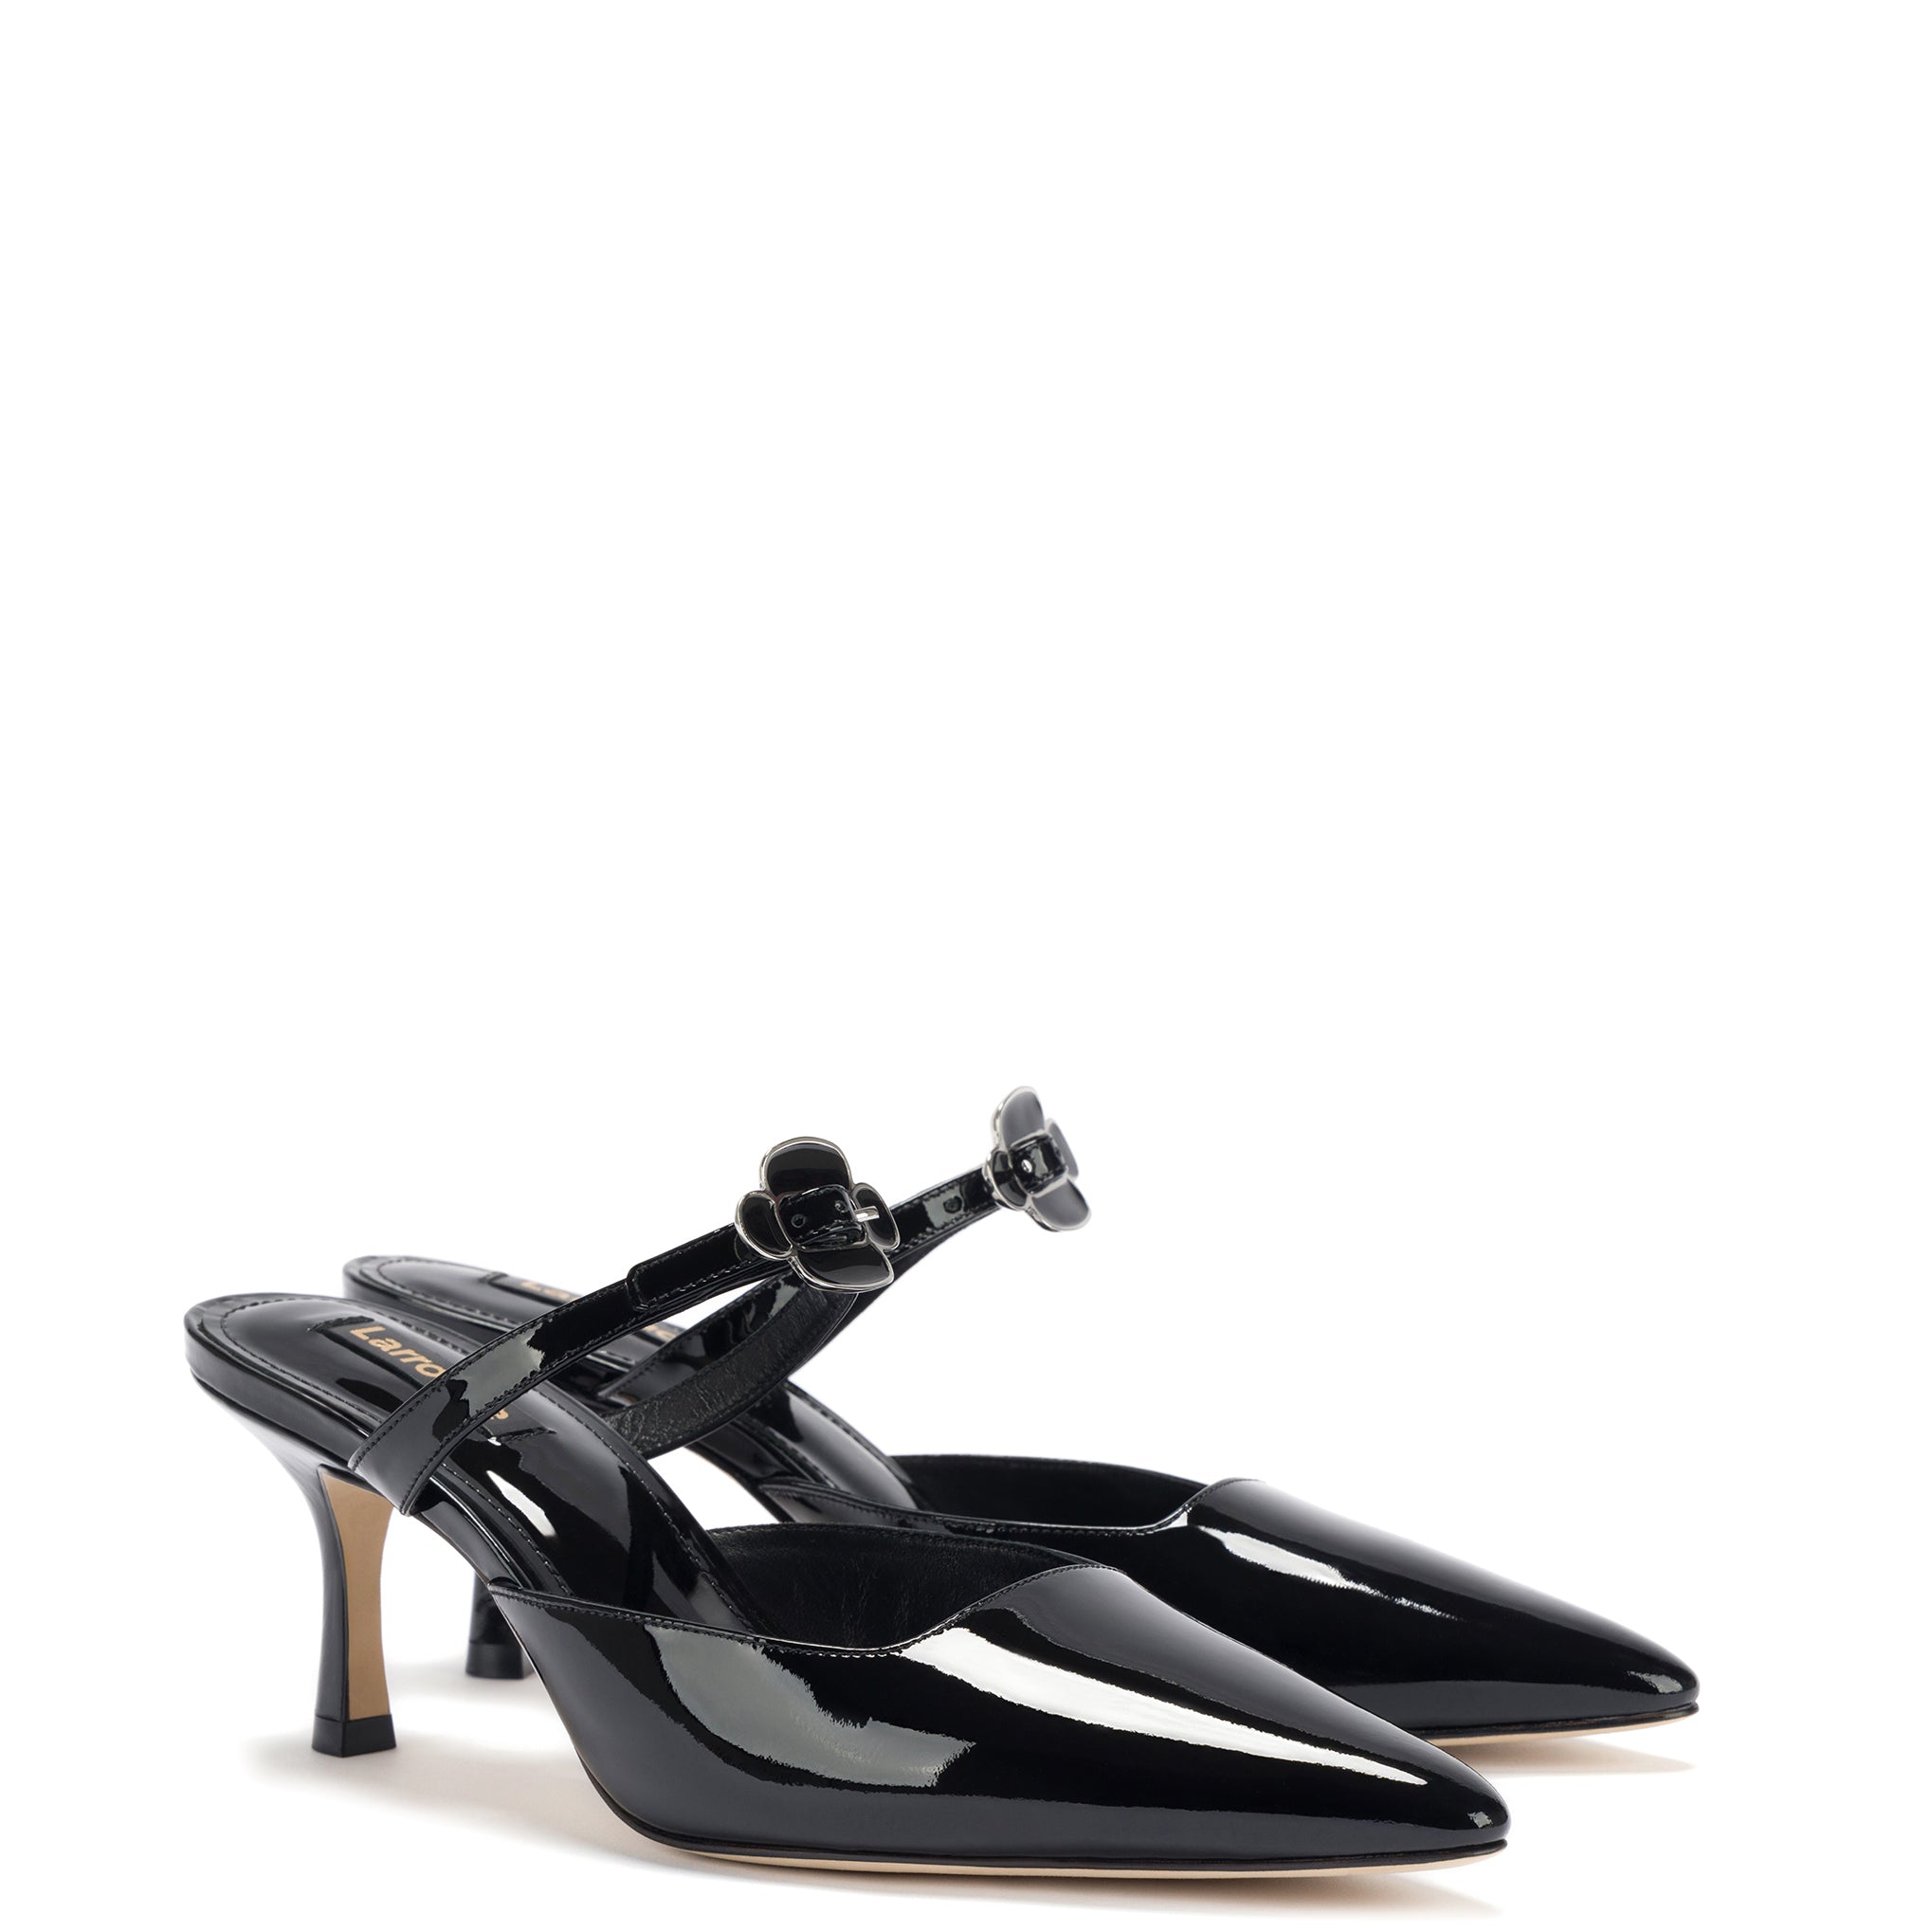 Daisy Pump In Black Patent Leather